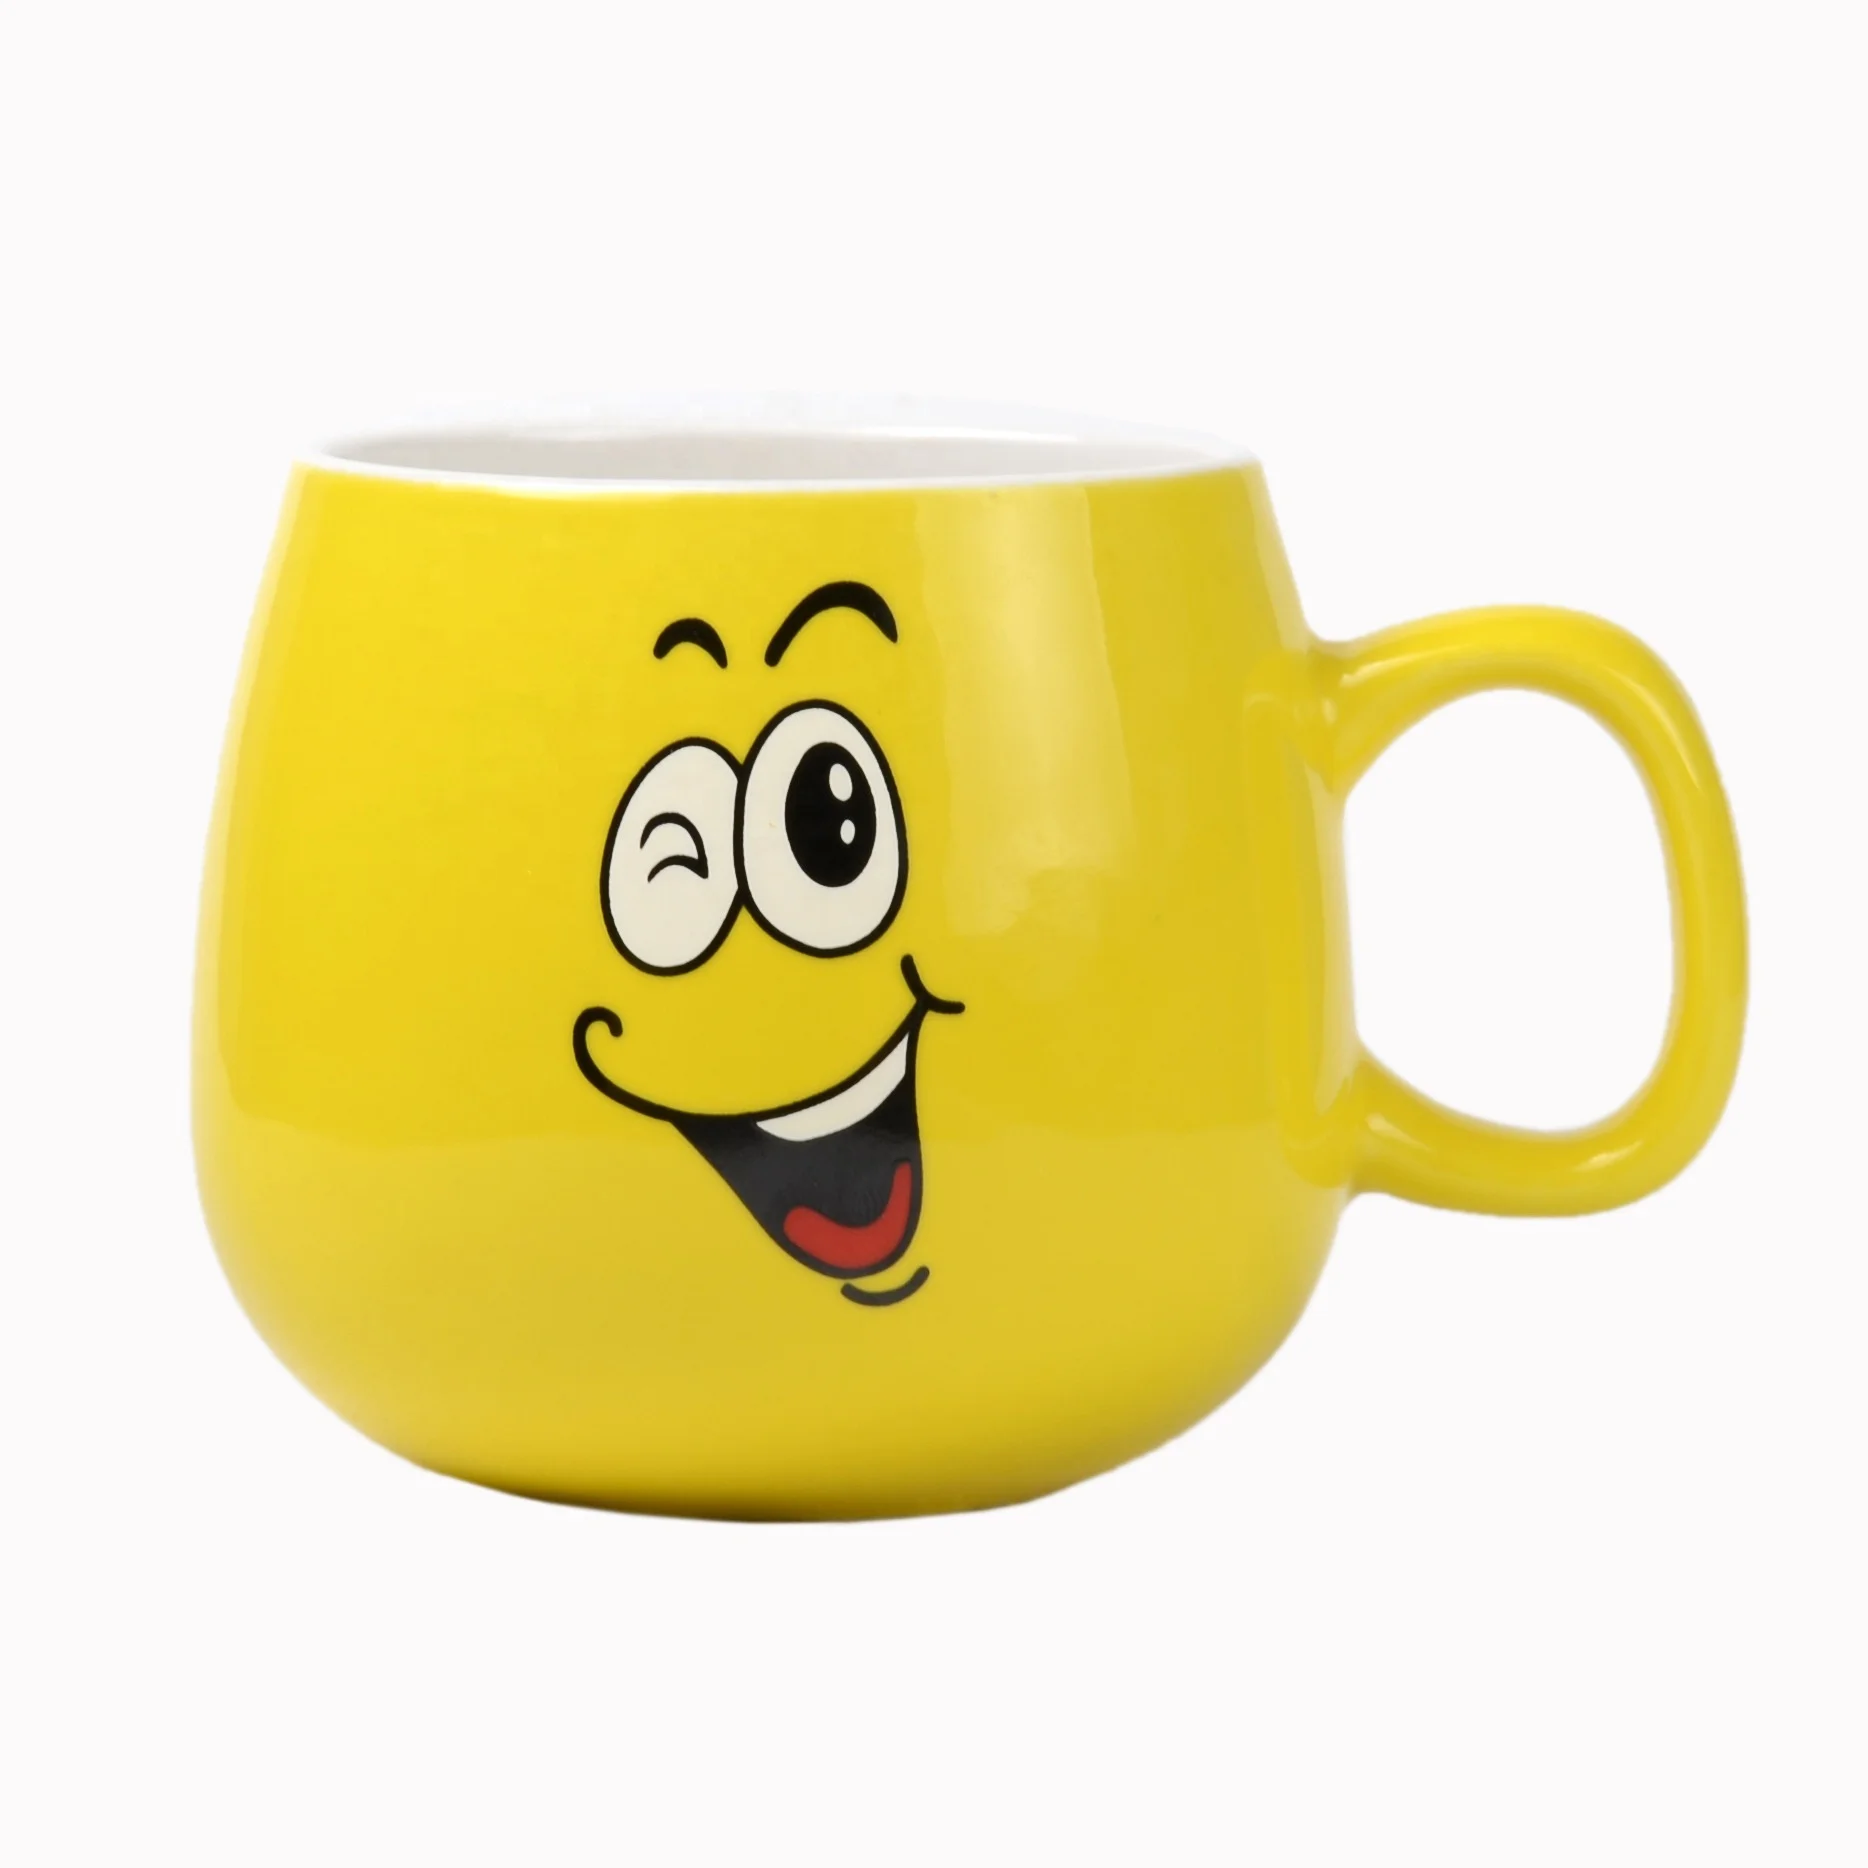 

Factory direct sell cheap price low MOQ glazed yellow ceramic porcelain drinking water mug cup with smile face